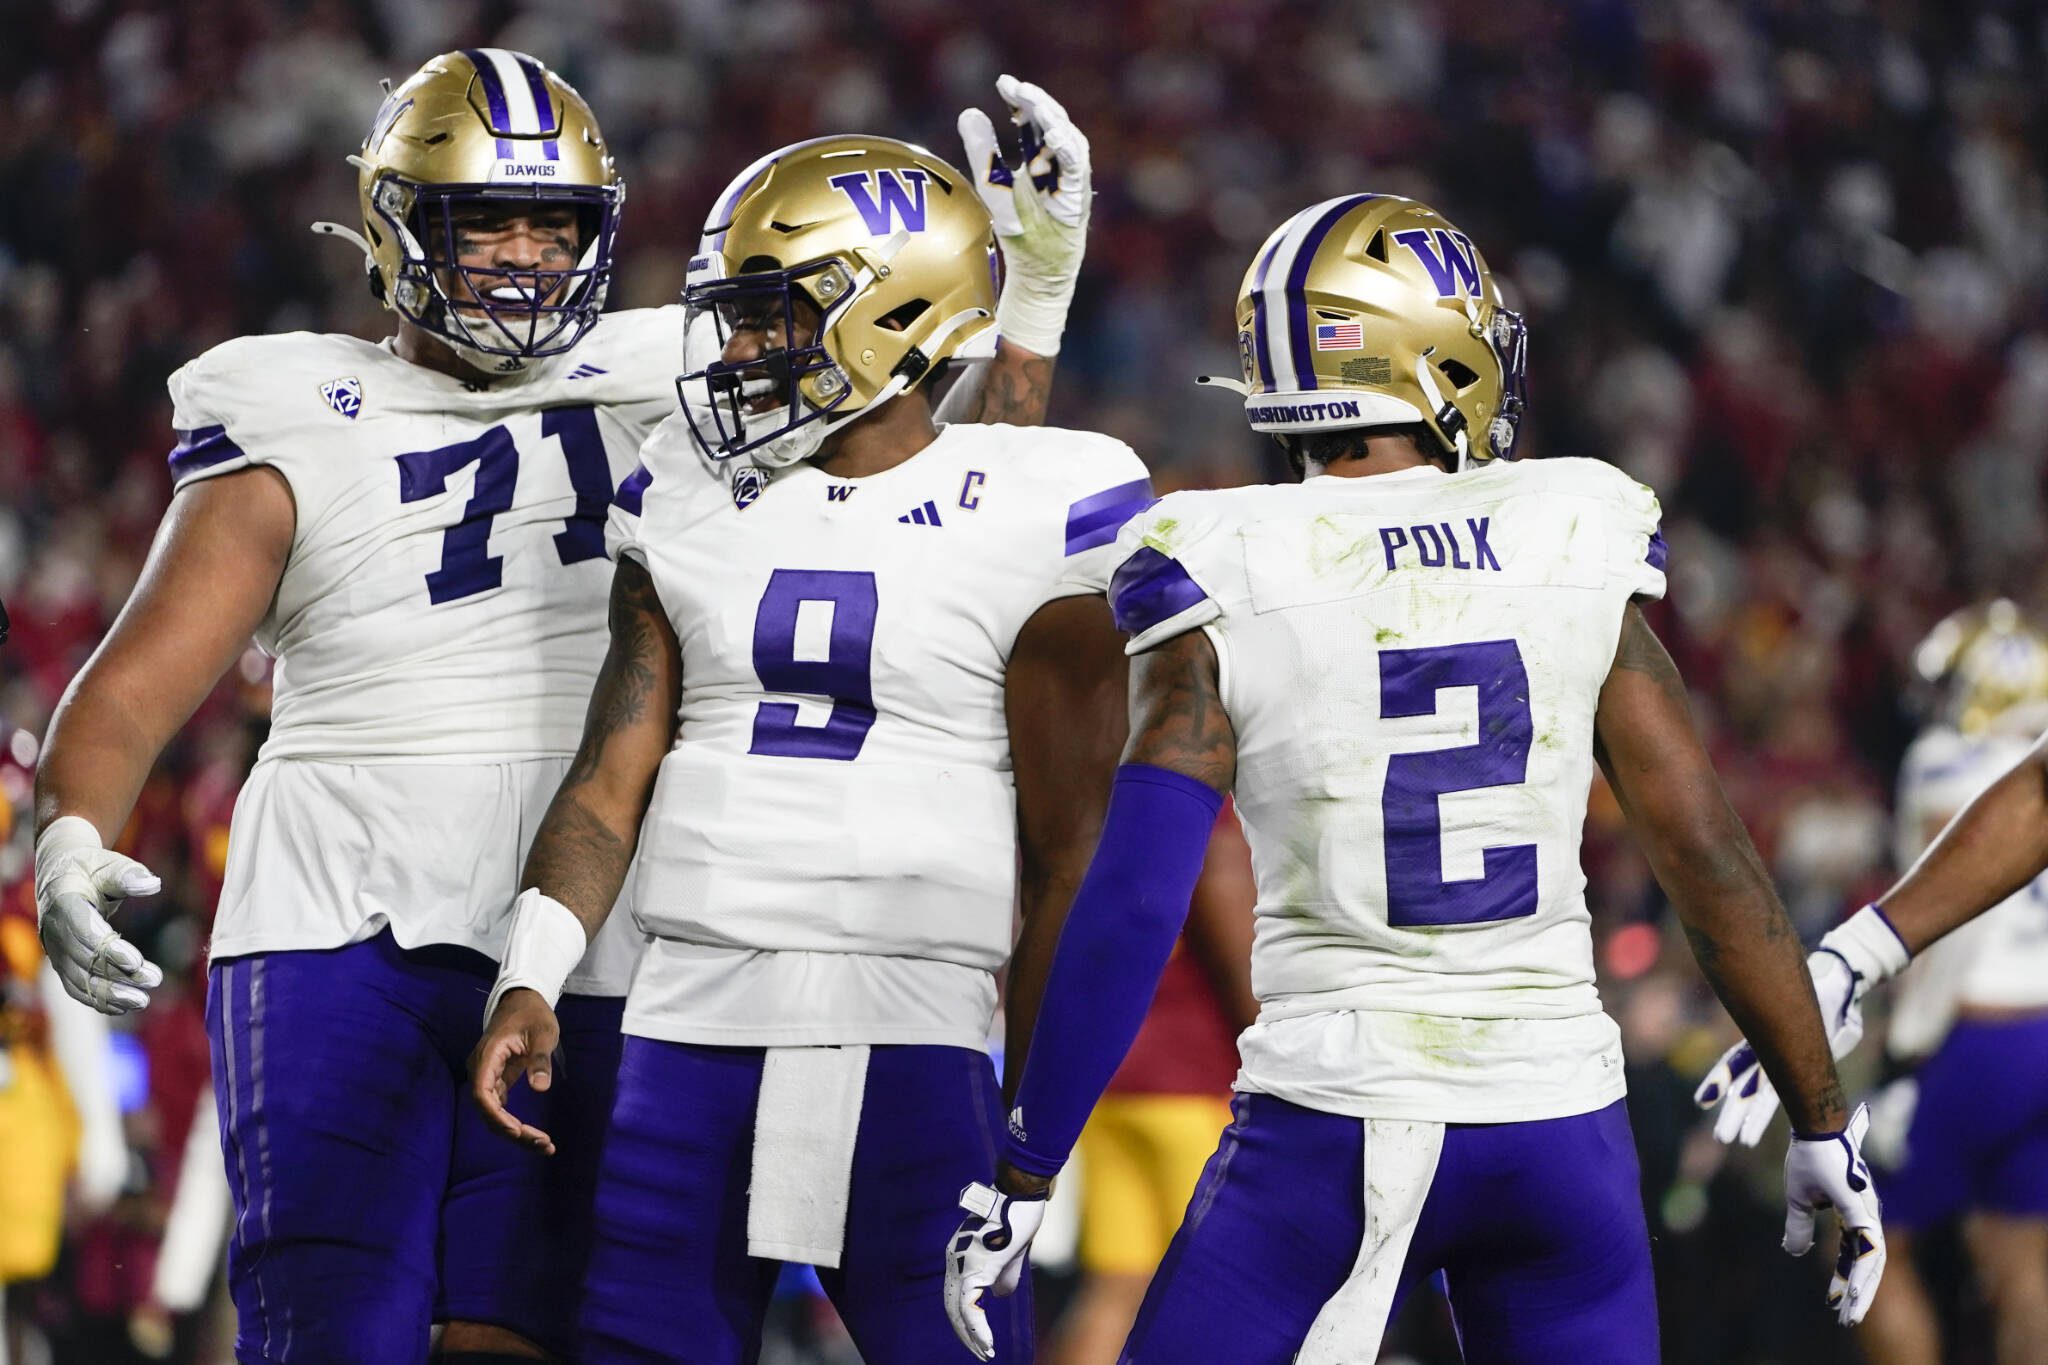 Washington offensive lineman Nate Kalepo (71) and quarterback Michael Penix Jr. (9) celebrate after a touchdown by wide receiver Ja’Lynn Polk (2) during a game against Southern California on Nov. 4 in Los Angeles. (AP Photo/Ryan Sun)